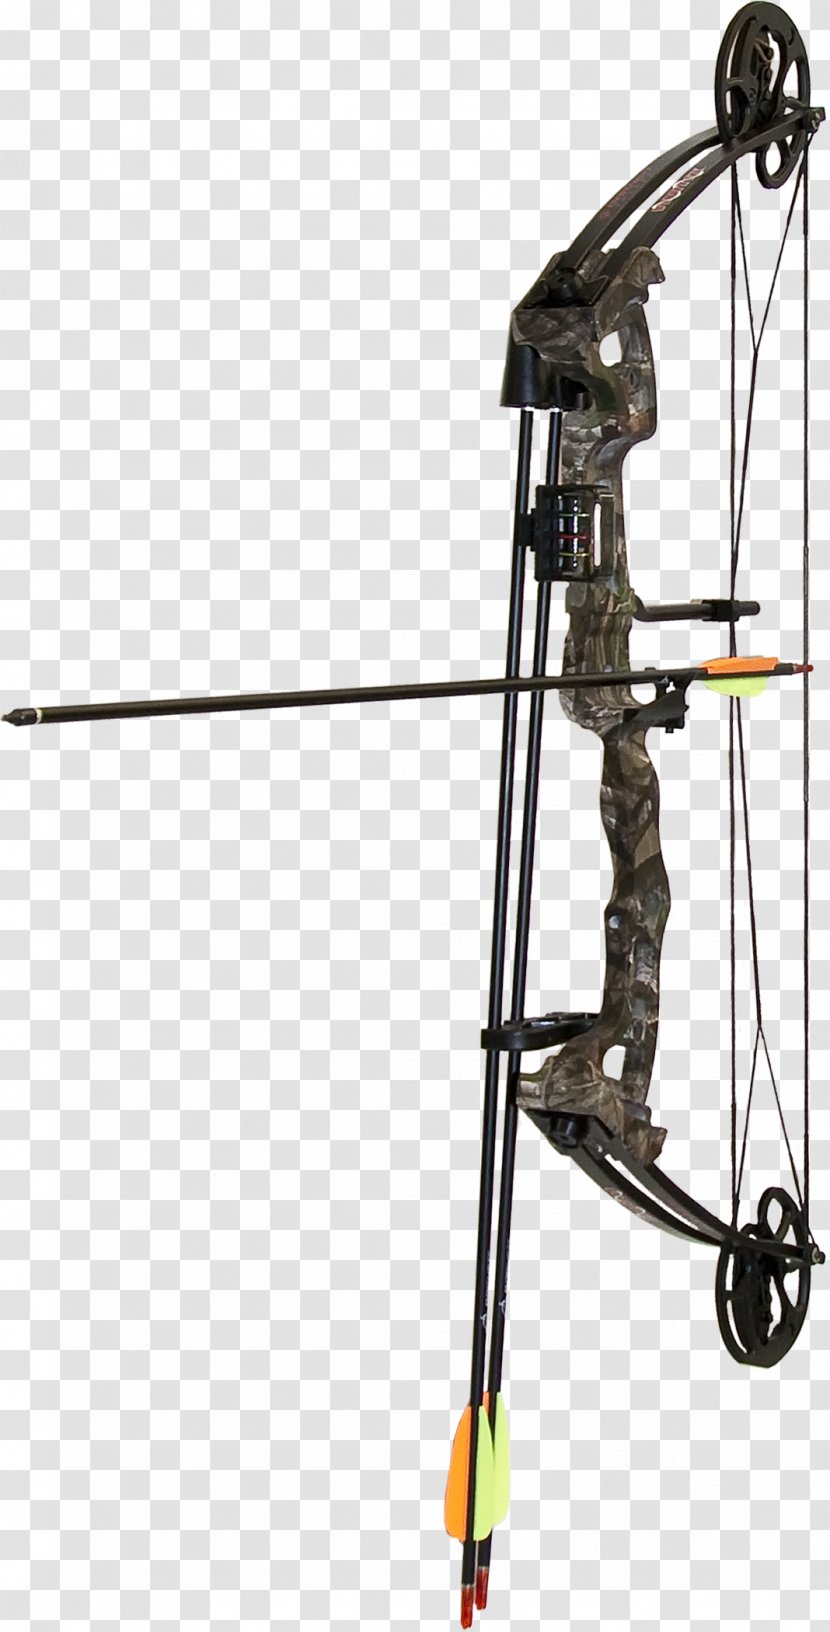 Compound Bows Bow And Arrow Archery Hunting - Tripod Transparent PNG